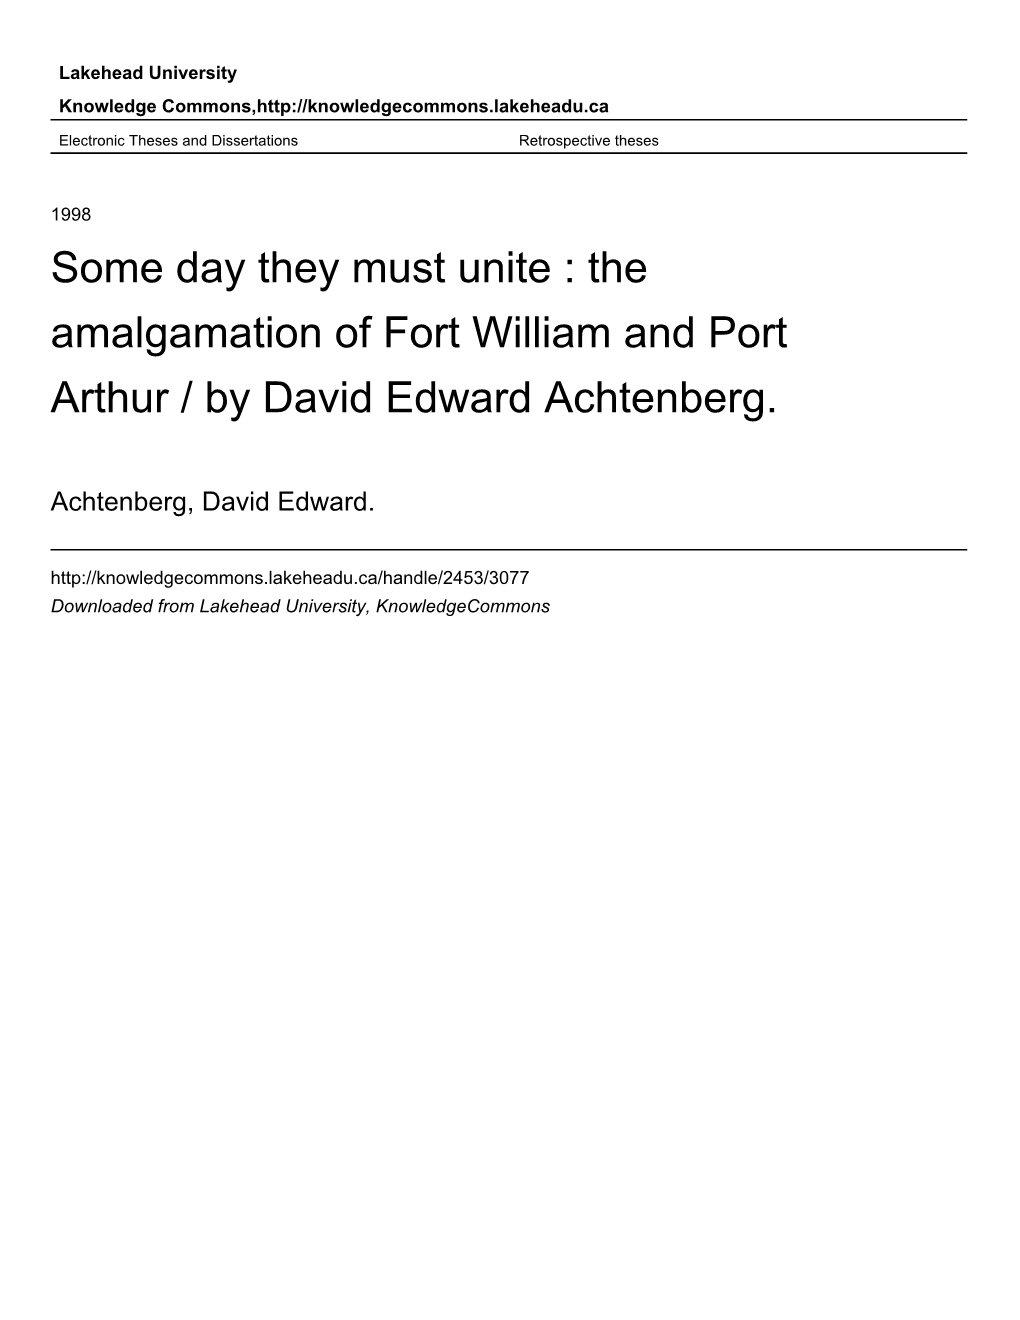 Some Day They Must Unite : the Amalgamation of Fort William and Port Arthur / by David Edward Achtenberg